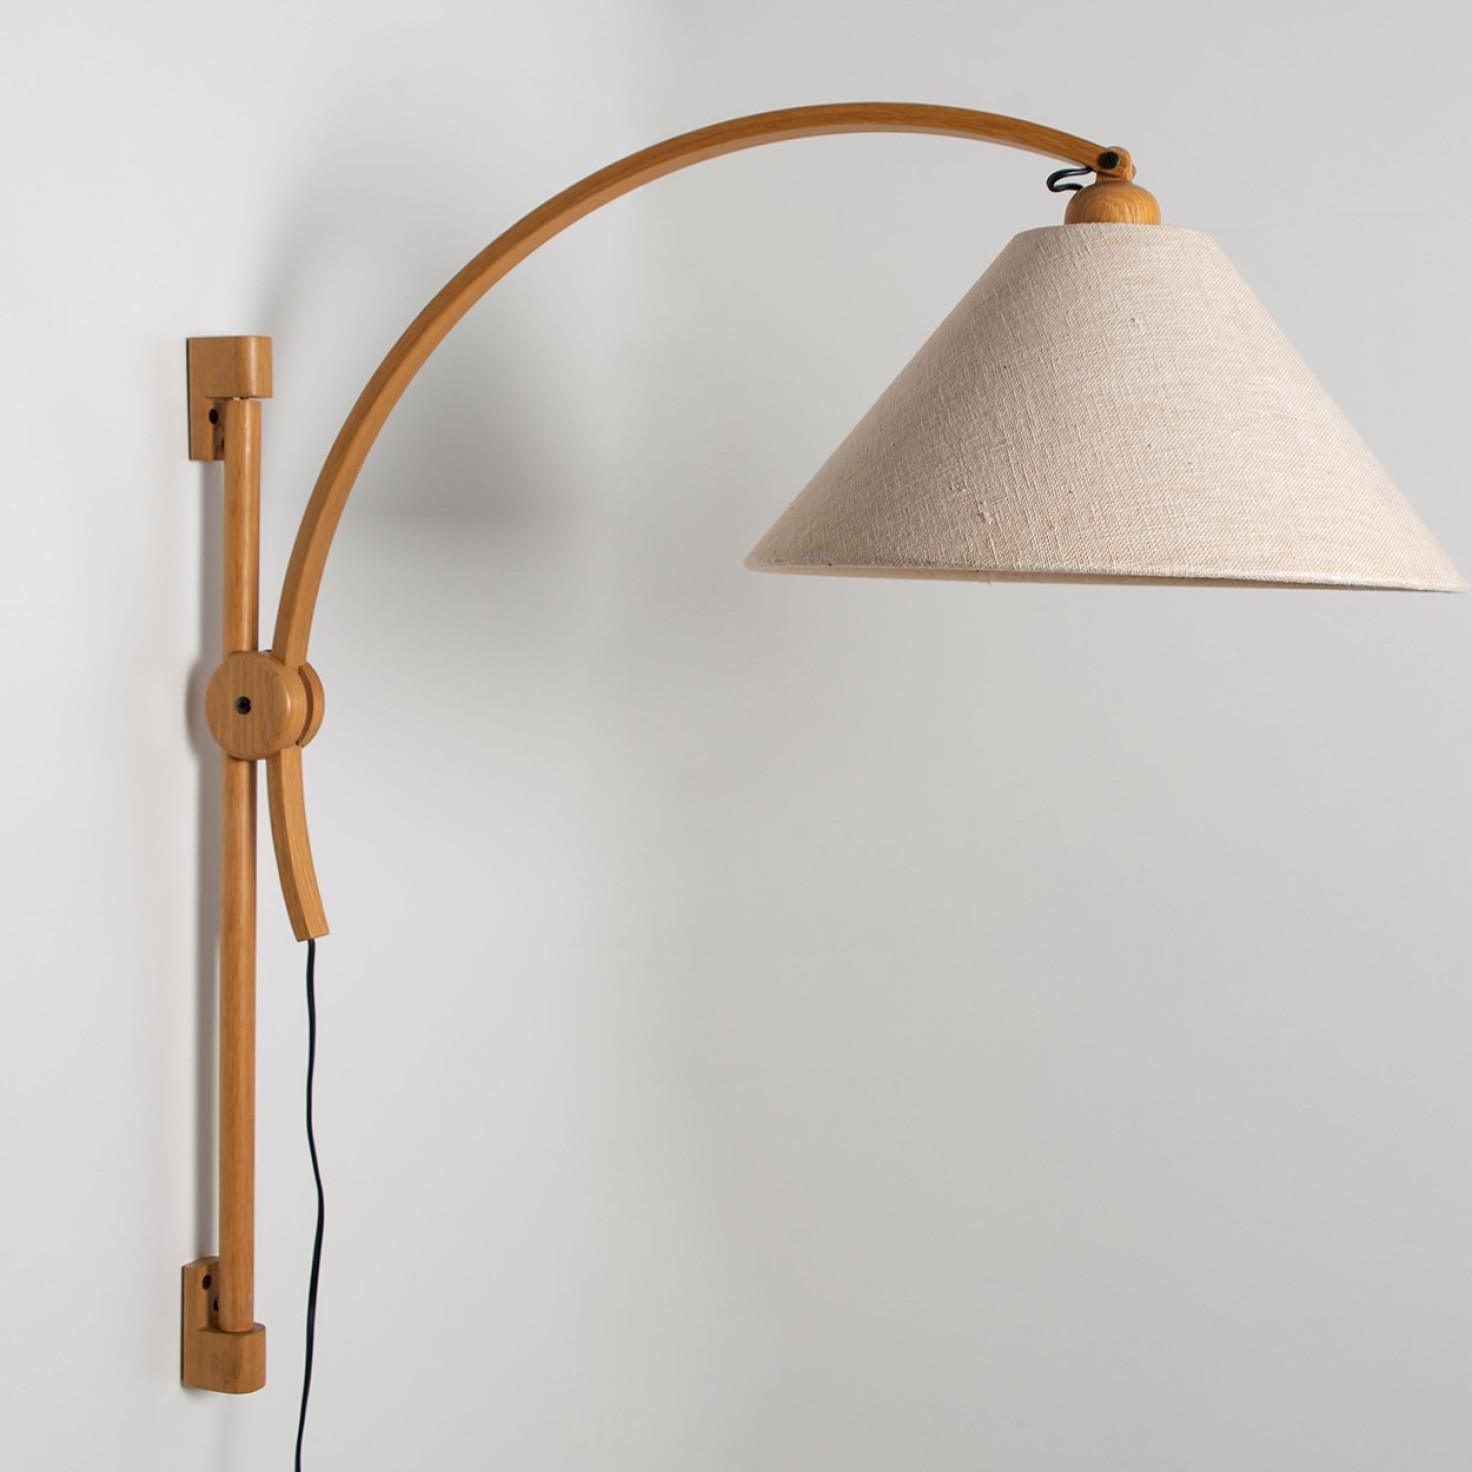 Mid-Century Modern Pair Of Wooden Wall Lights with Natural Shade by Domus Germany, 1970s For Sale